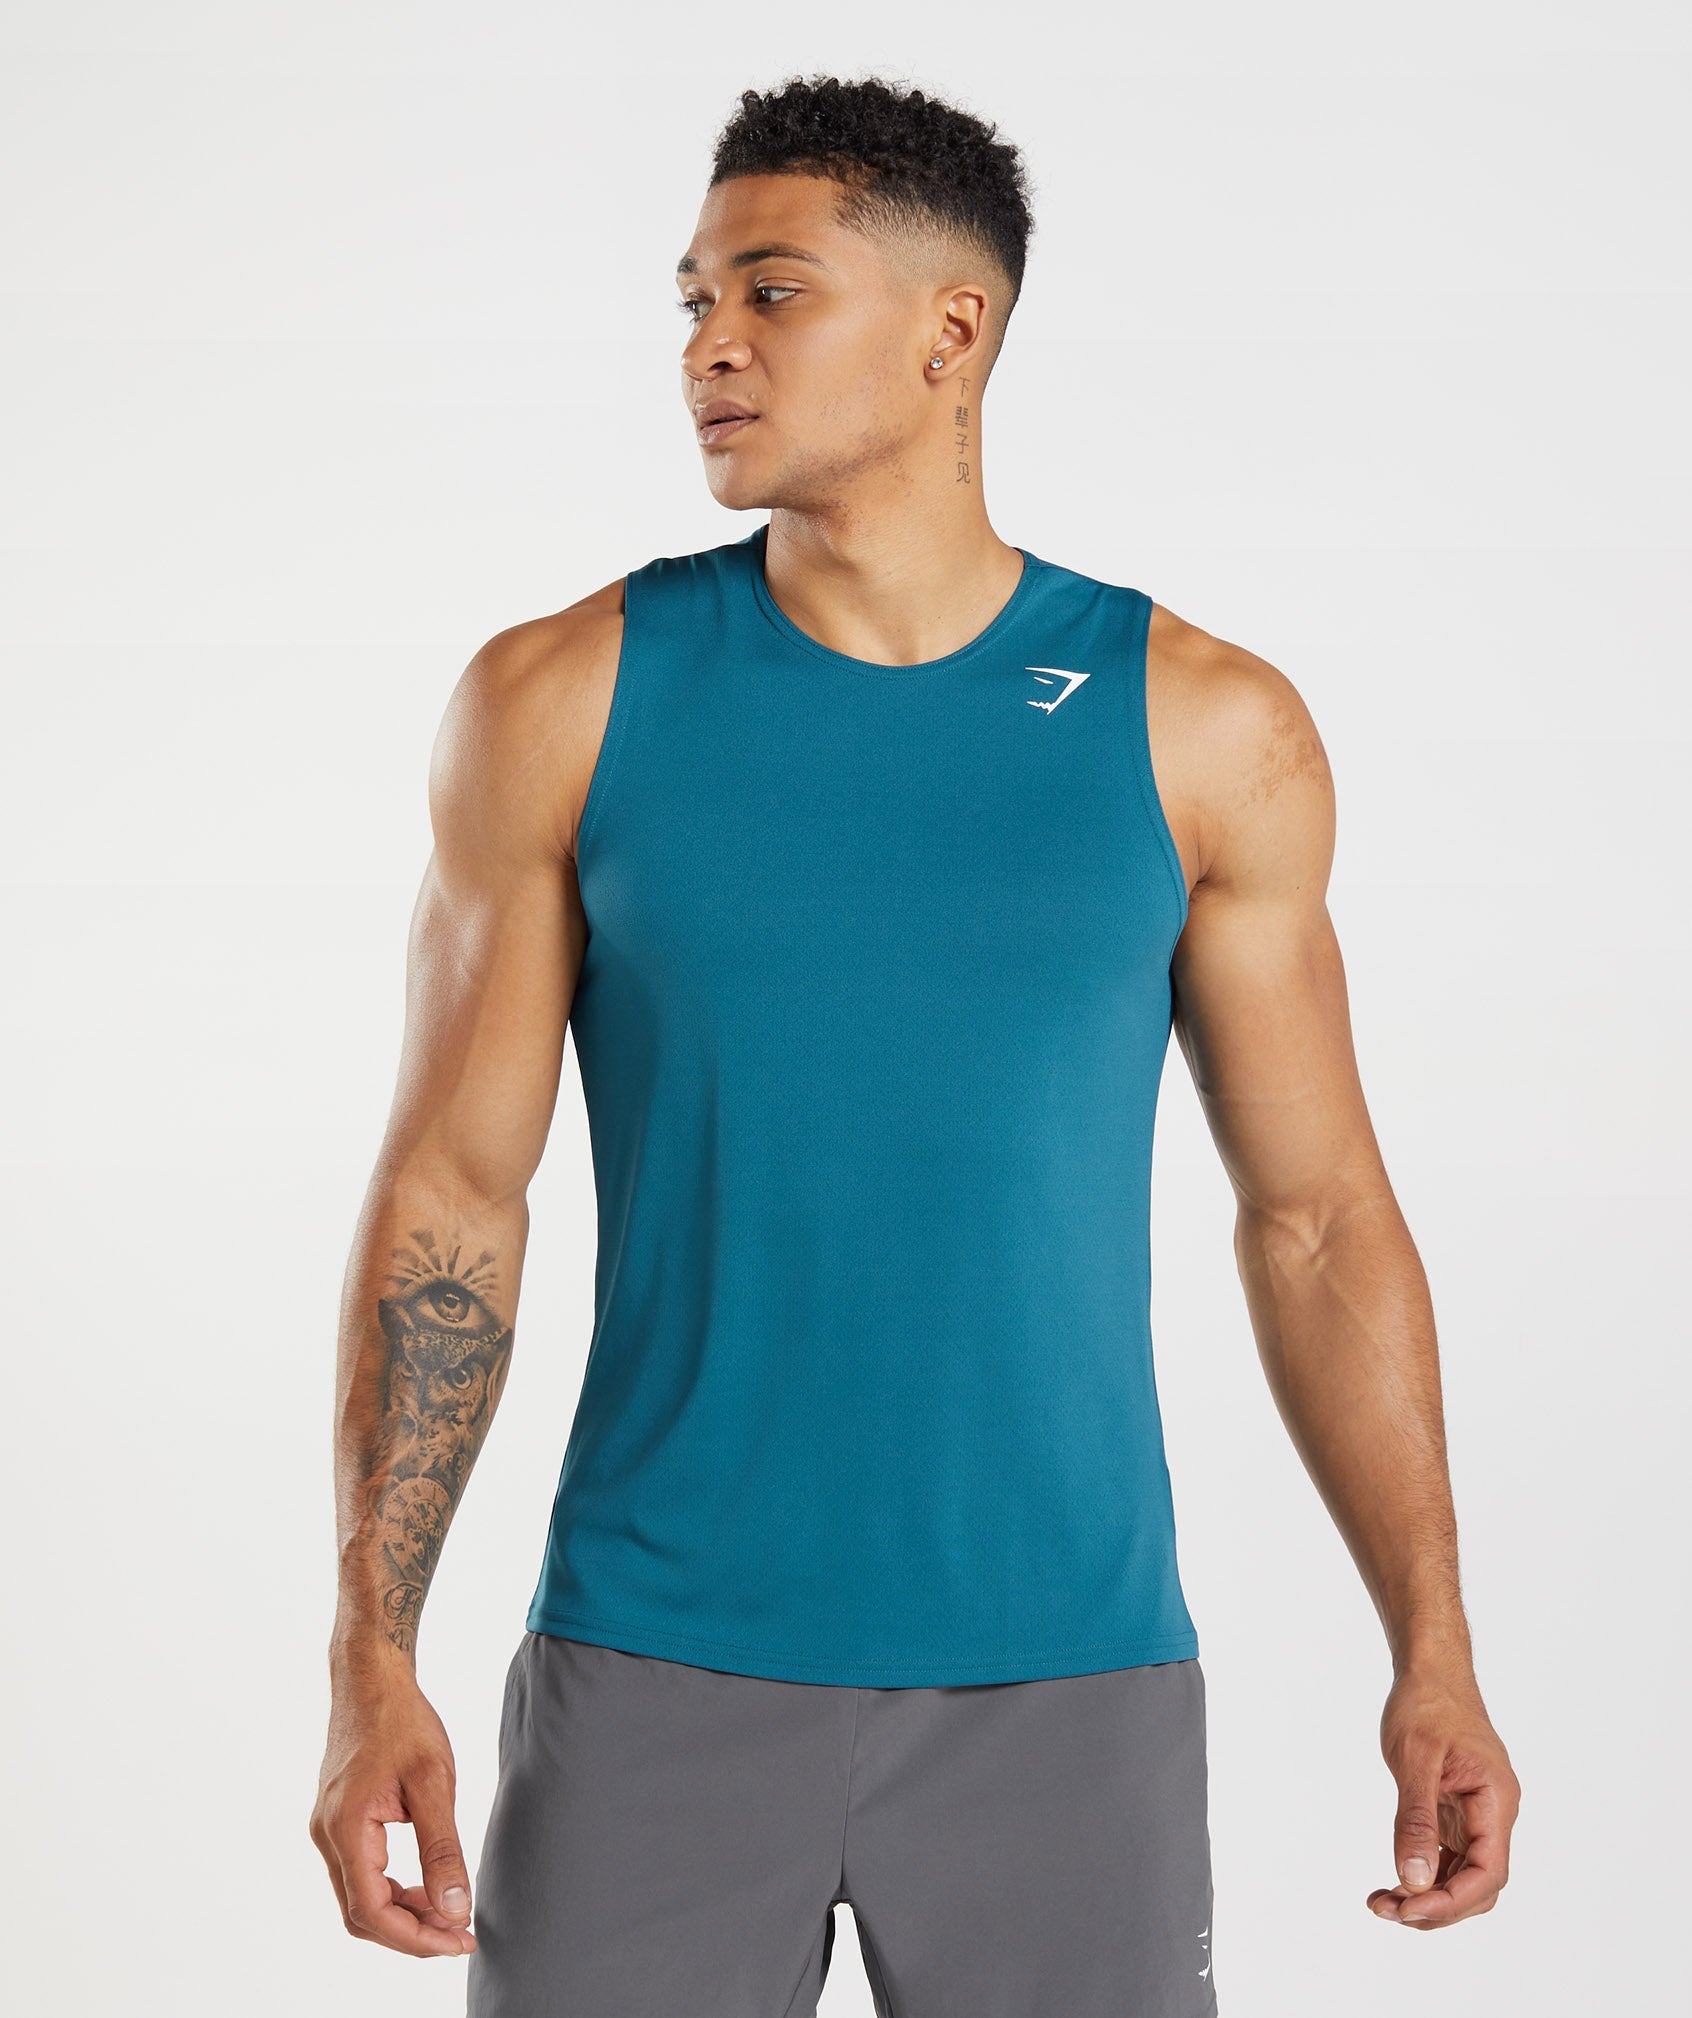 Arrival Tank in Atlantic Blue is out of stock